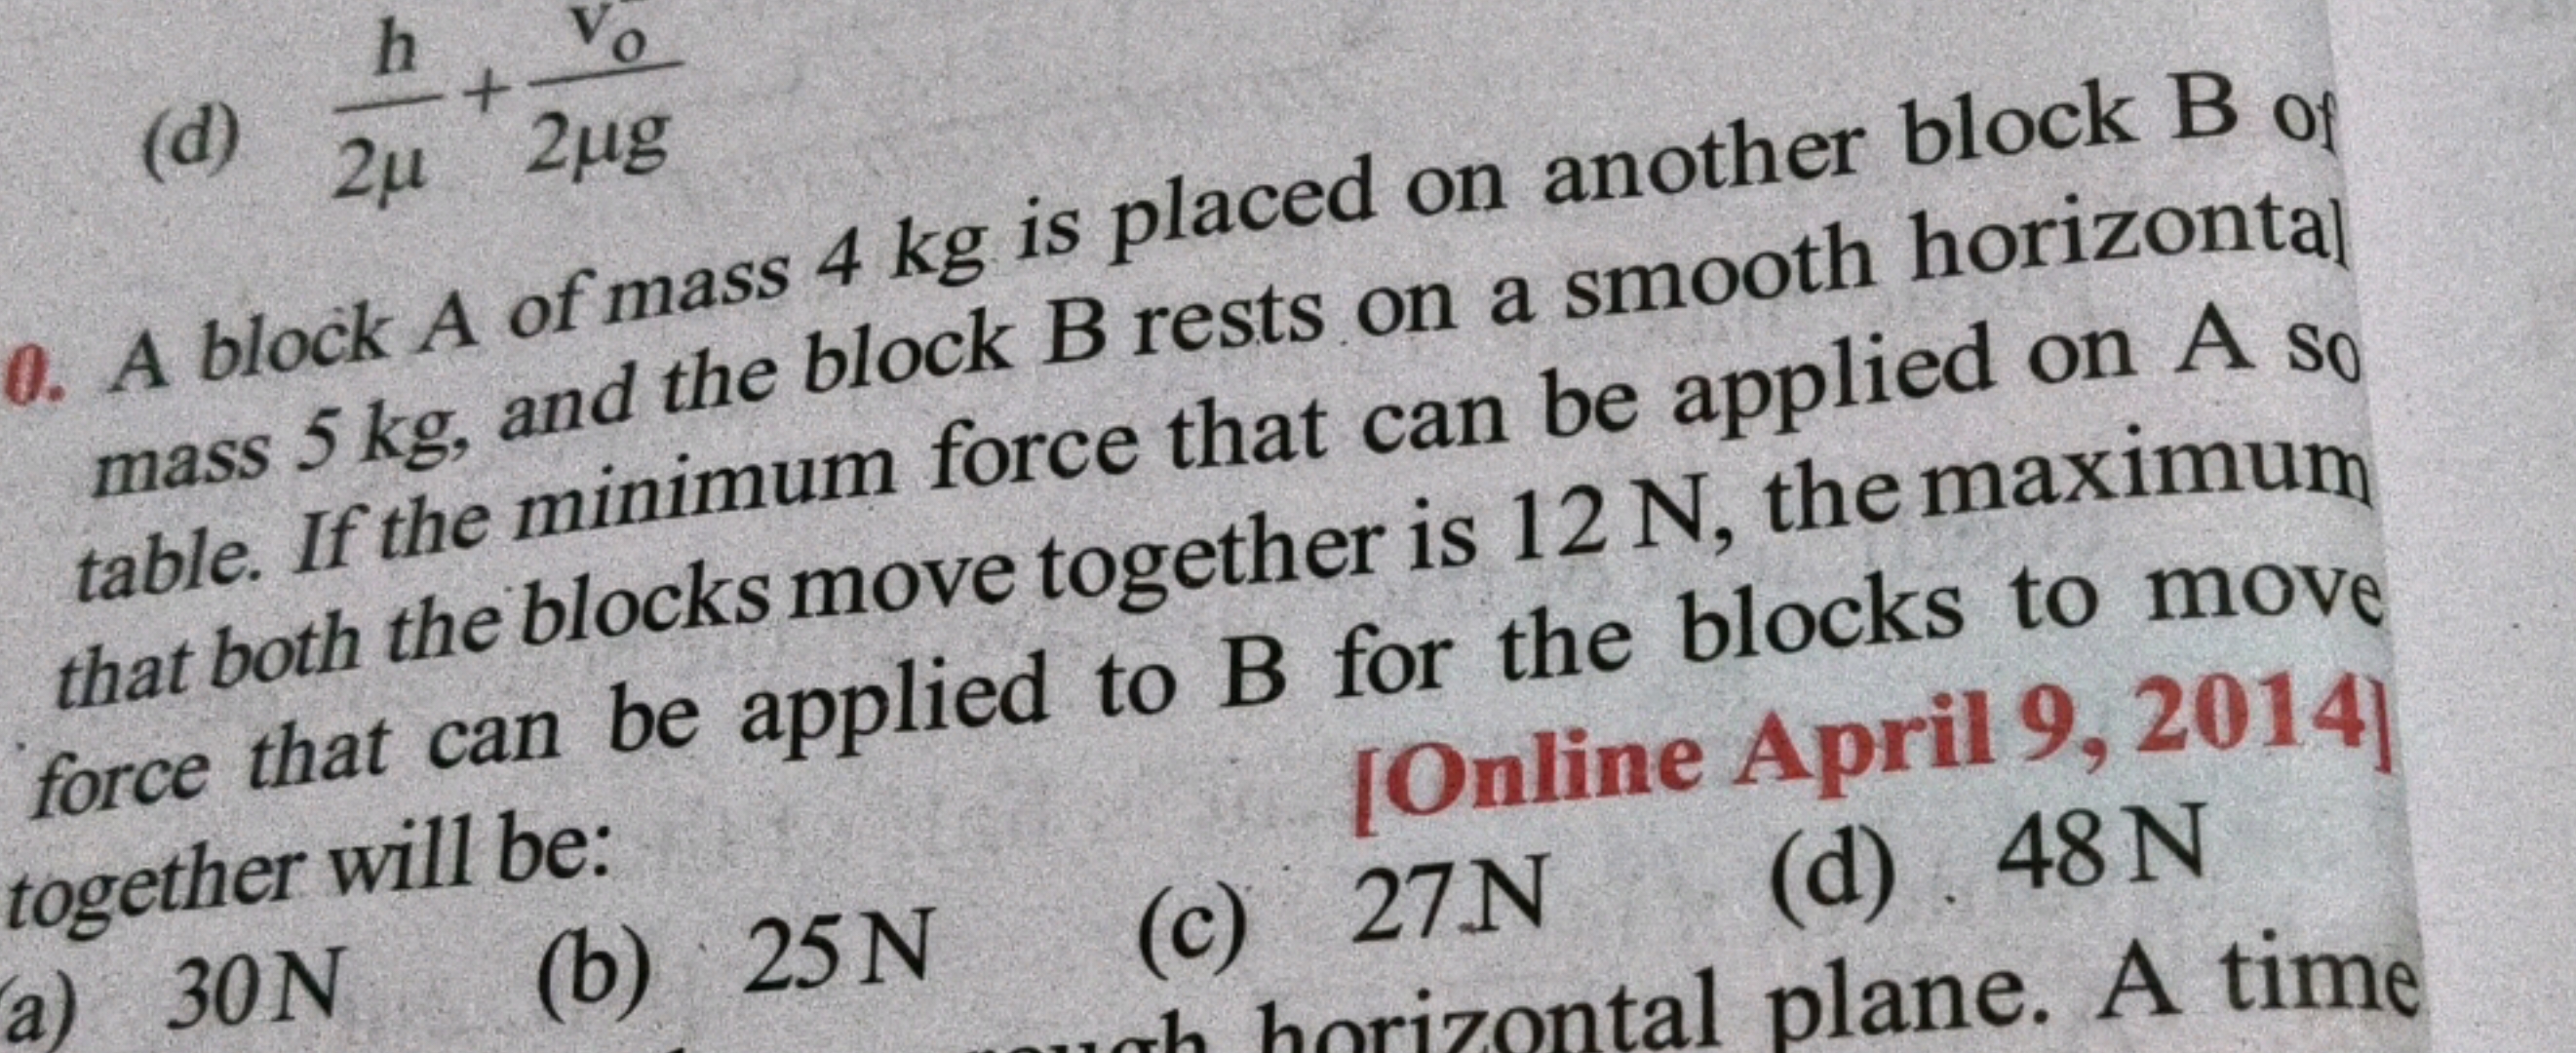 (d) 2μh​+2μgvo​​
0. A block A of mass 4 kg is placed on another block 